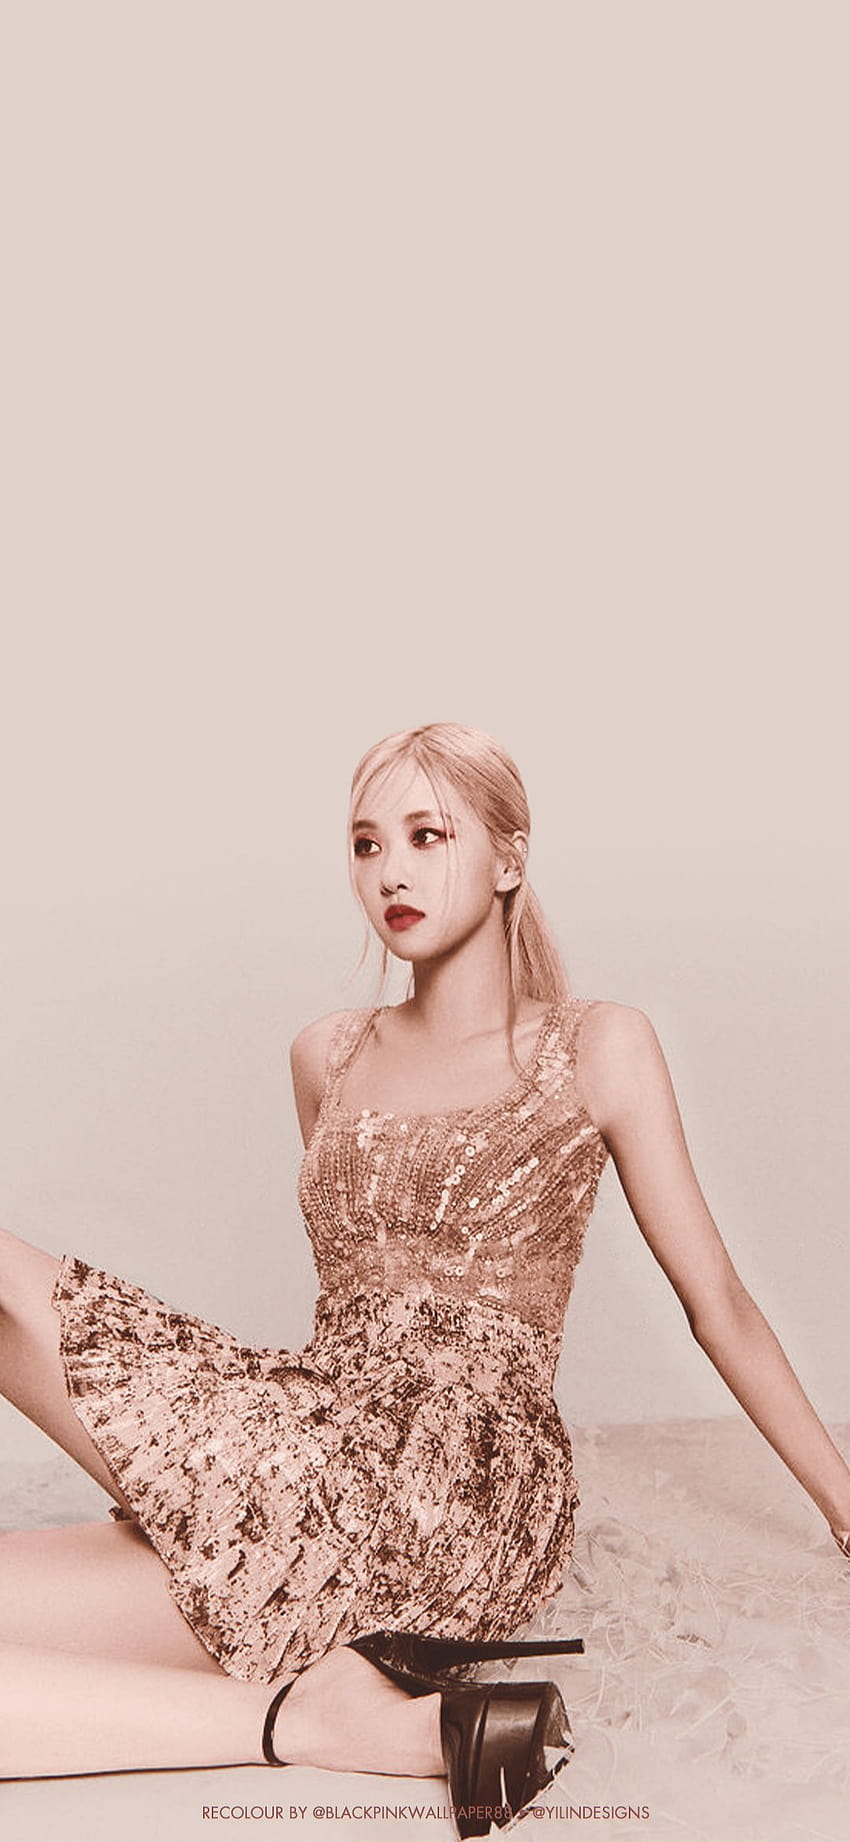 ROSÉ ON THE GROUND in 2021, gone rose HD phone wallpaper